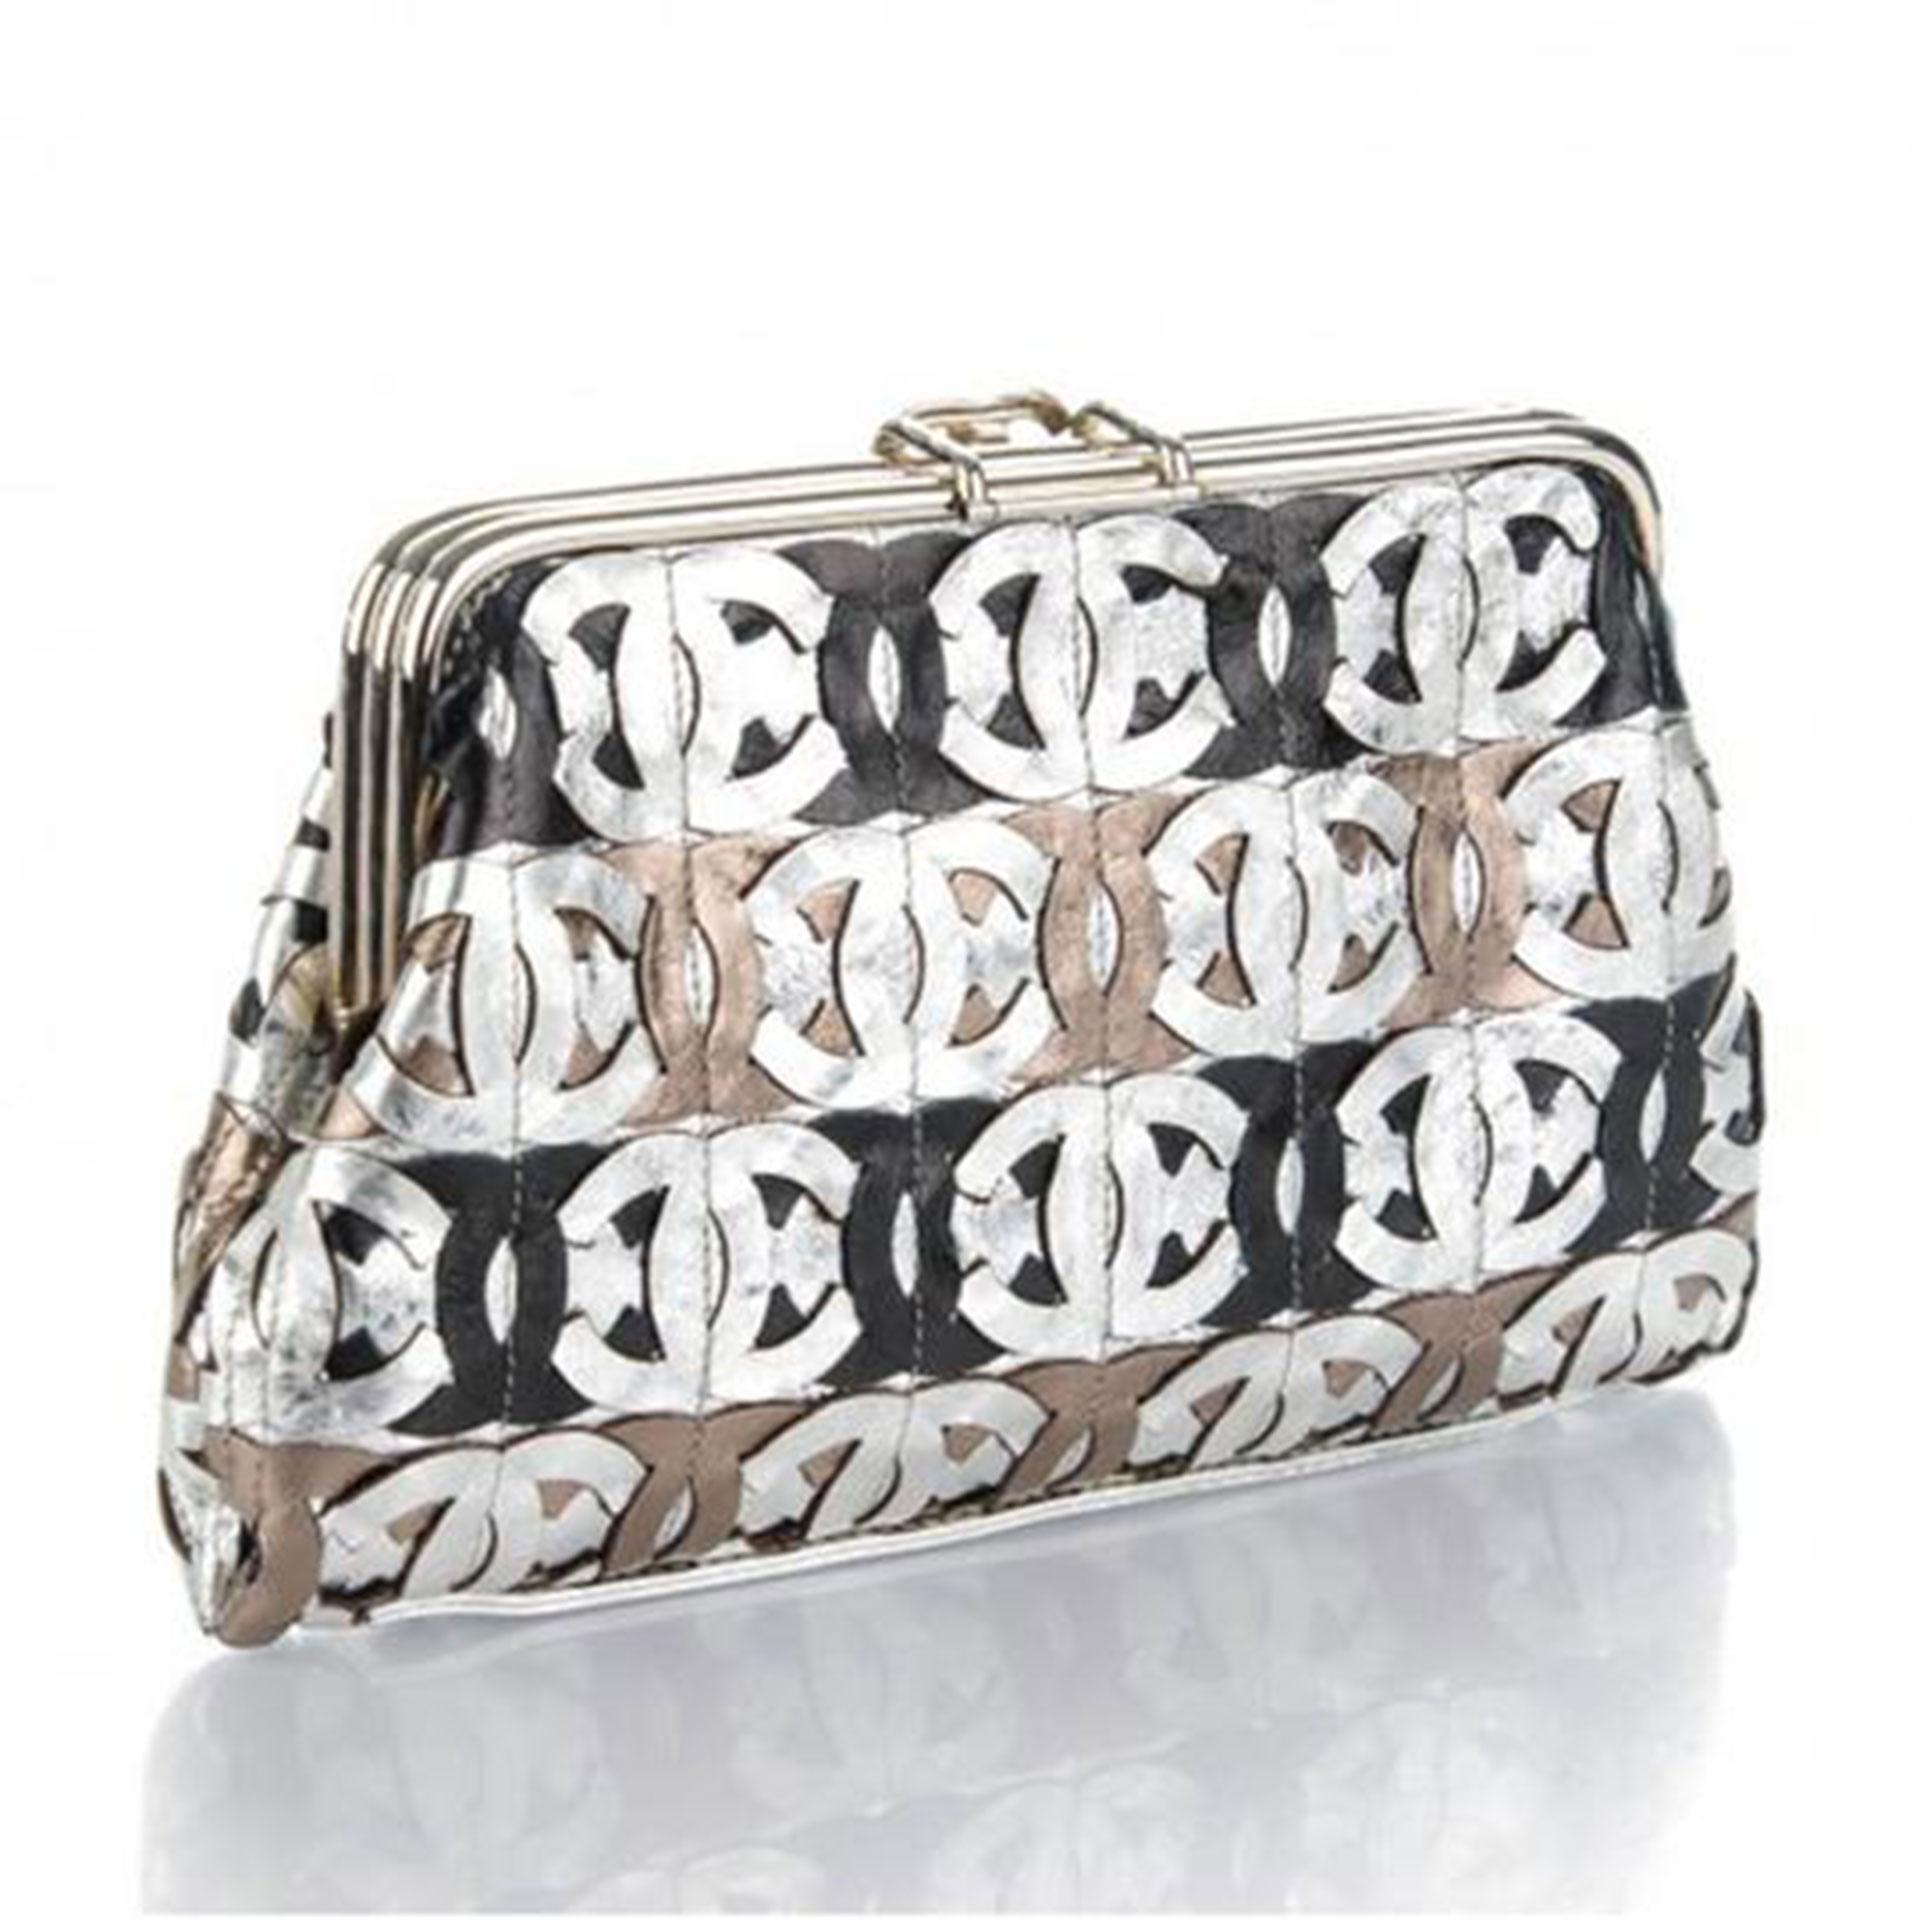 Chanel Laser Etched Multi CC Limited Edition Metallic Silver Bronze ...